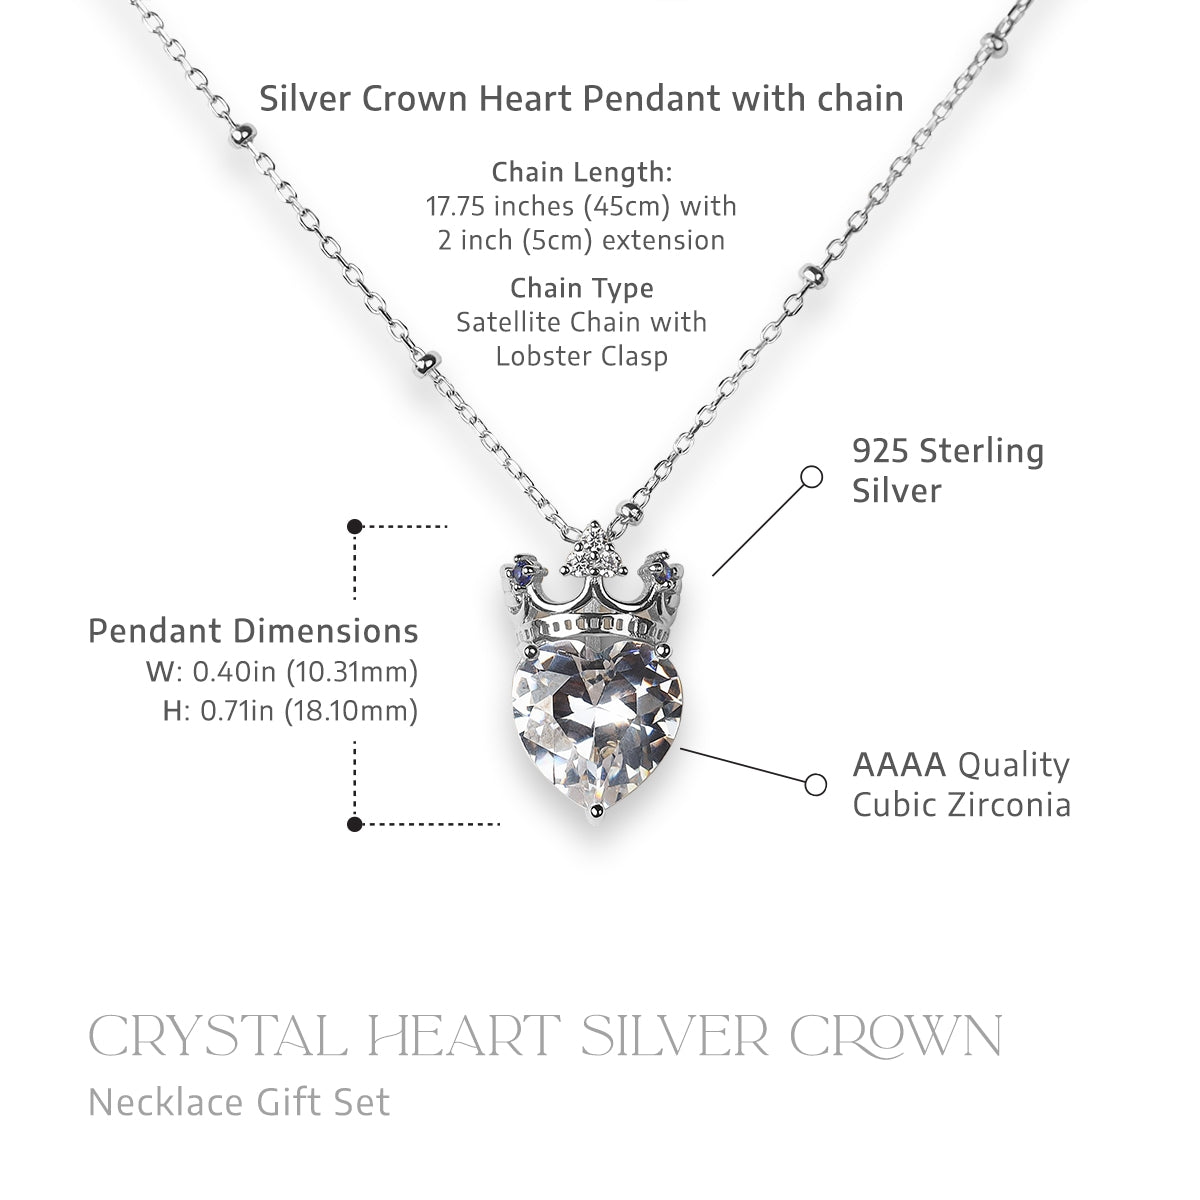 Mother of Little Dragons - Crystal Heart Silver Crown Necklace Gift Set